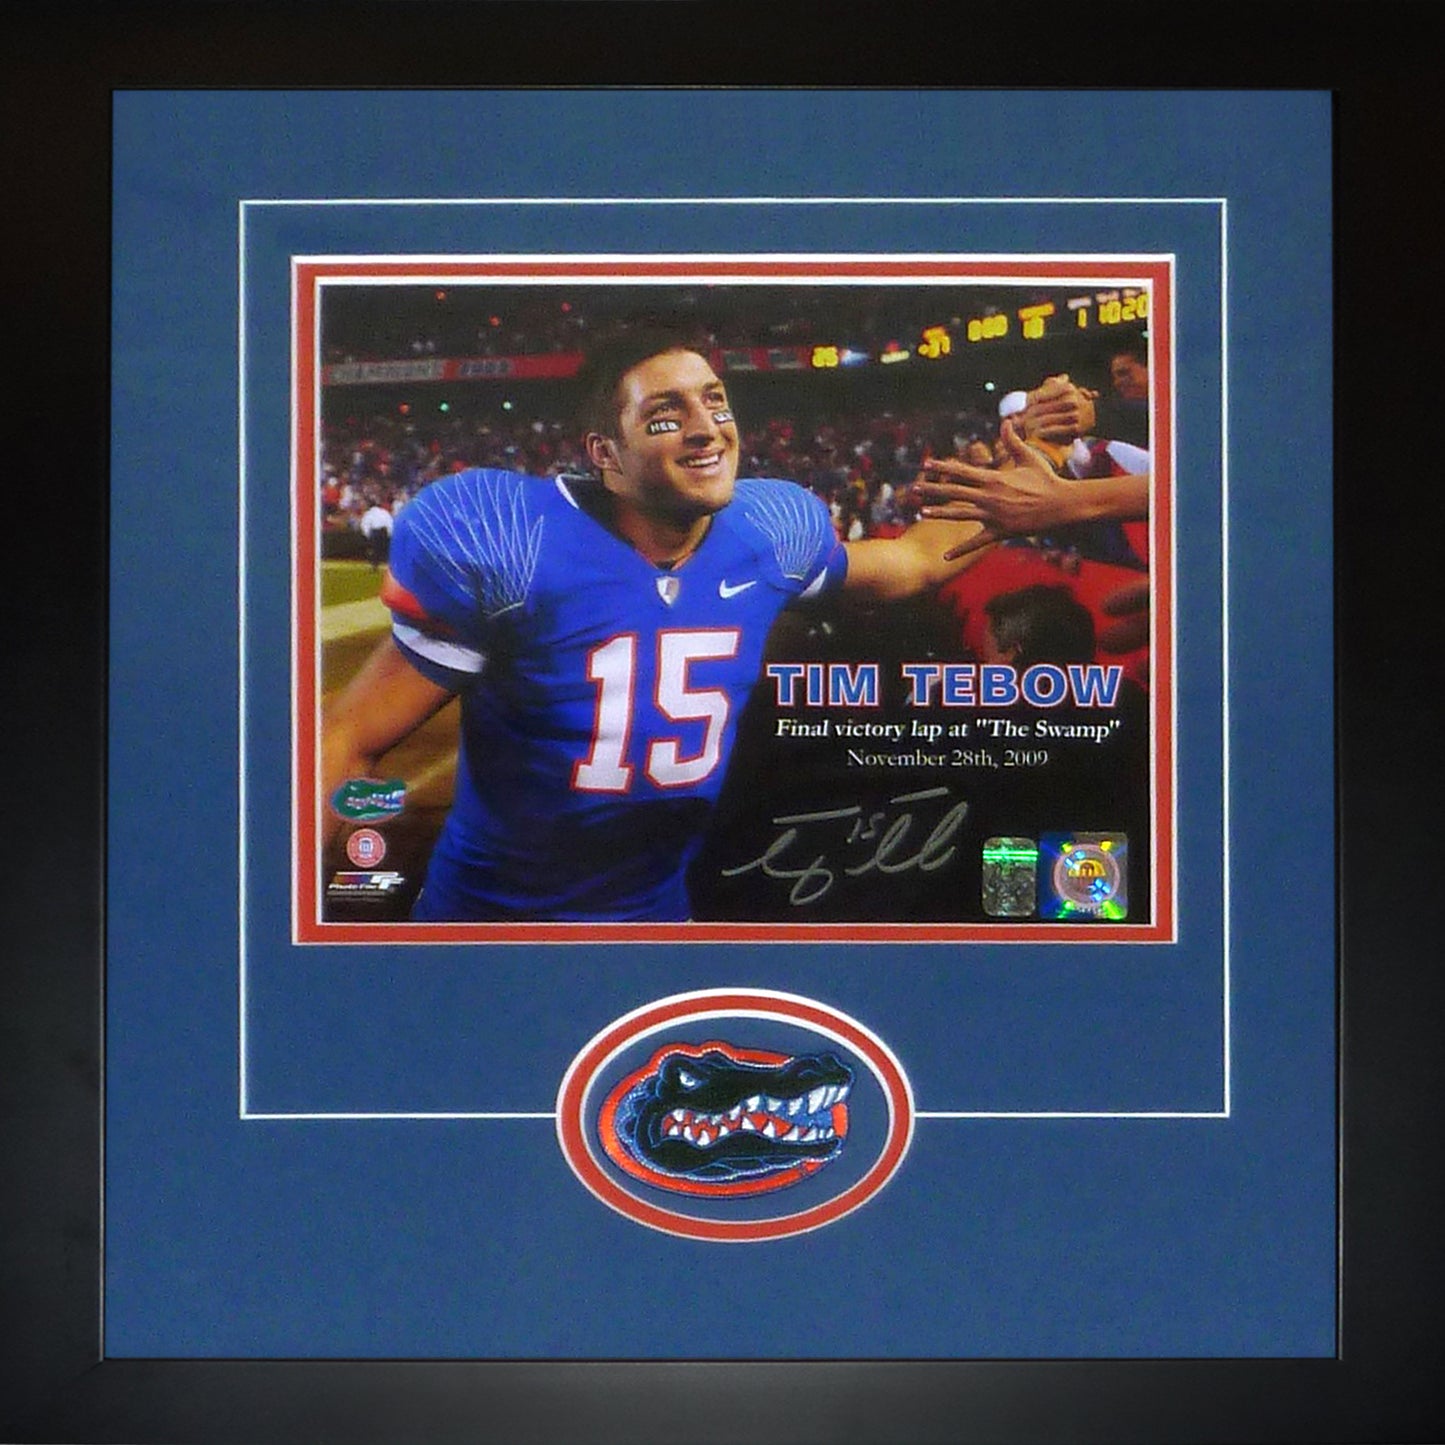 Tim Tebow Autographed Florida Gators (Final Victory Lap) Deluxe Framed 8x10 Photo - Tebow Holo